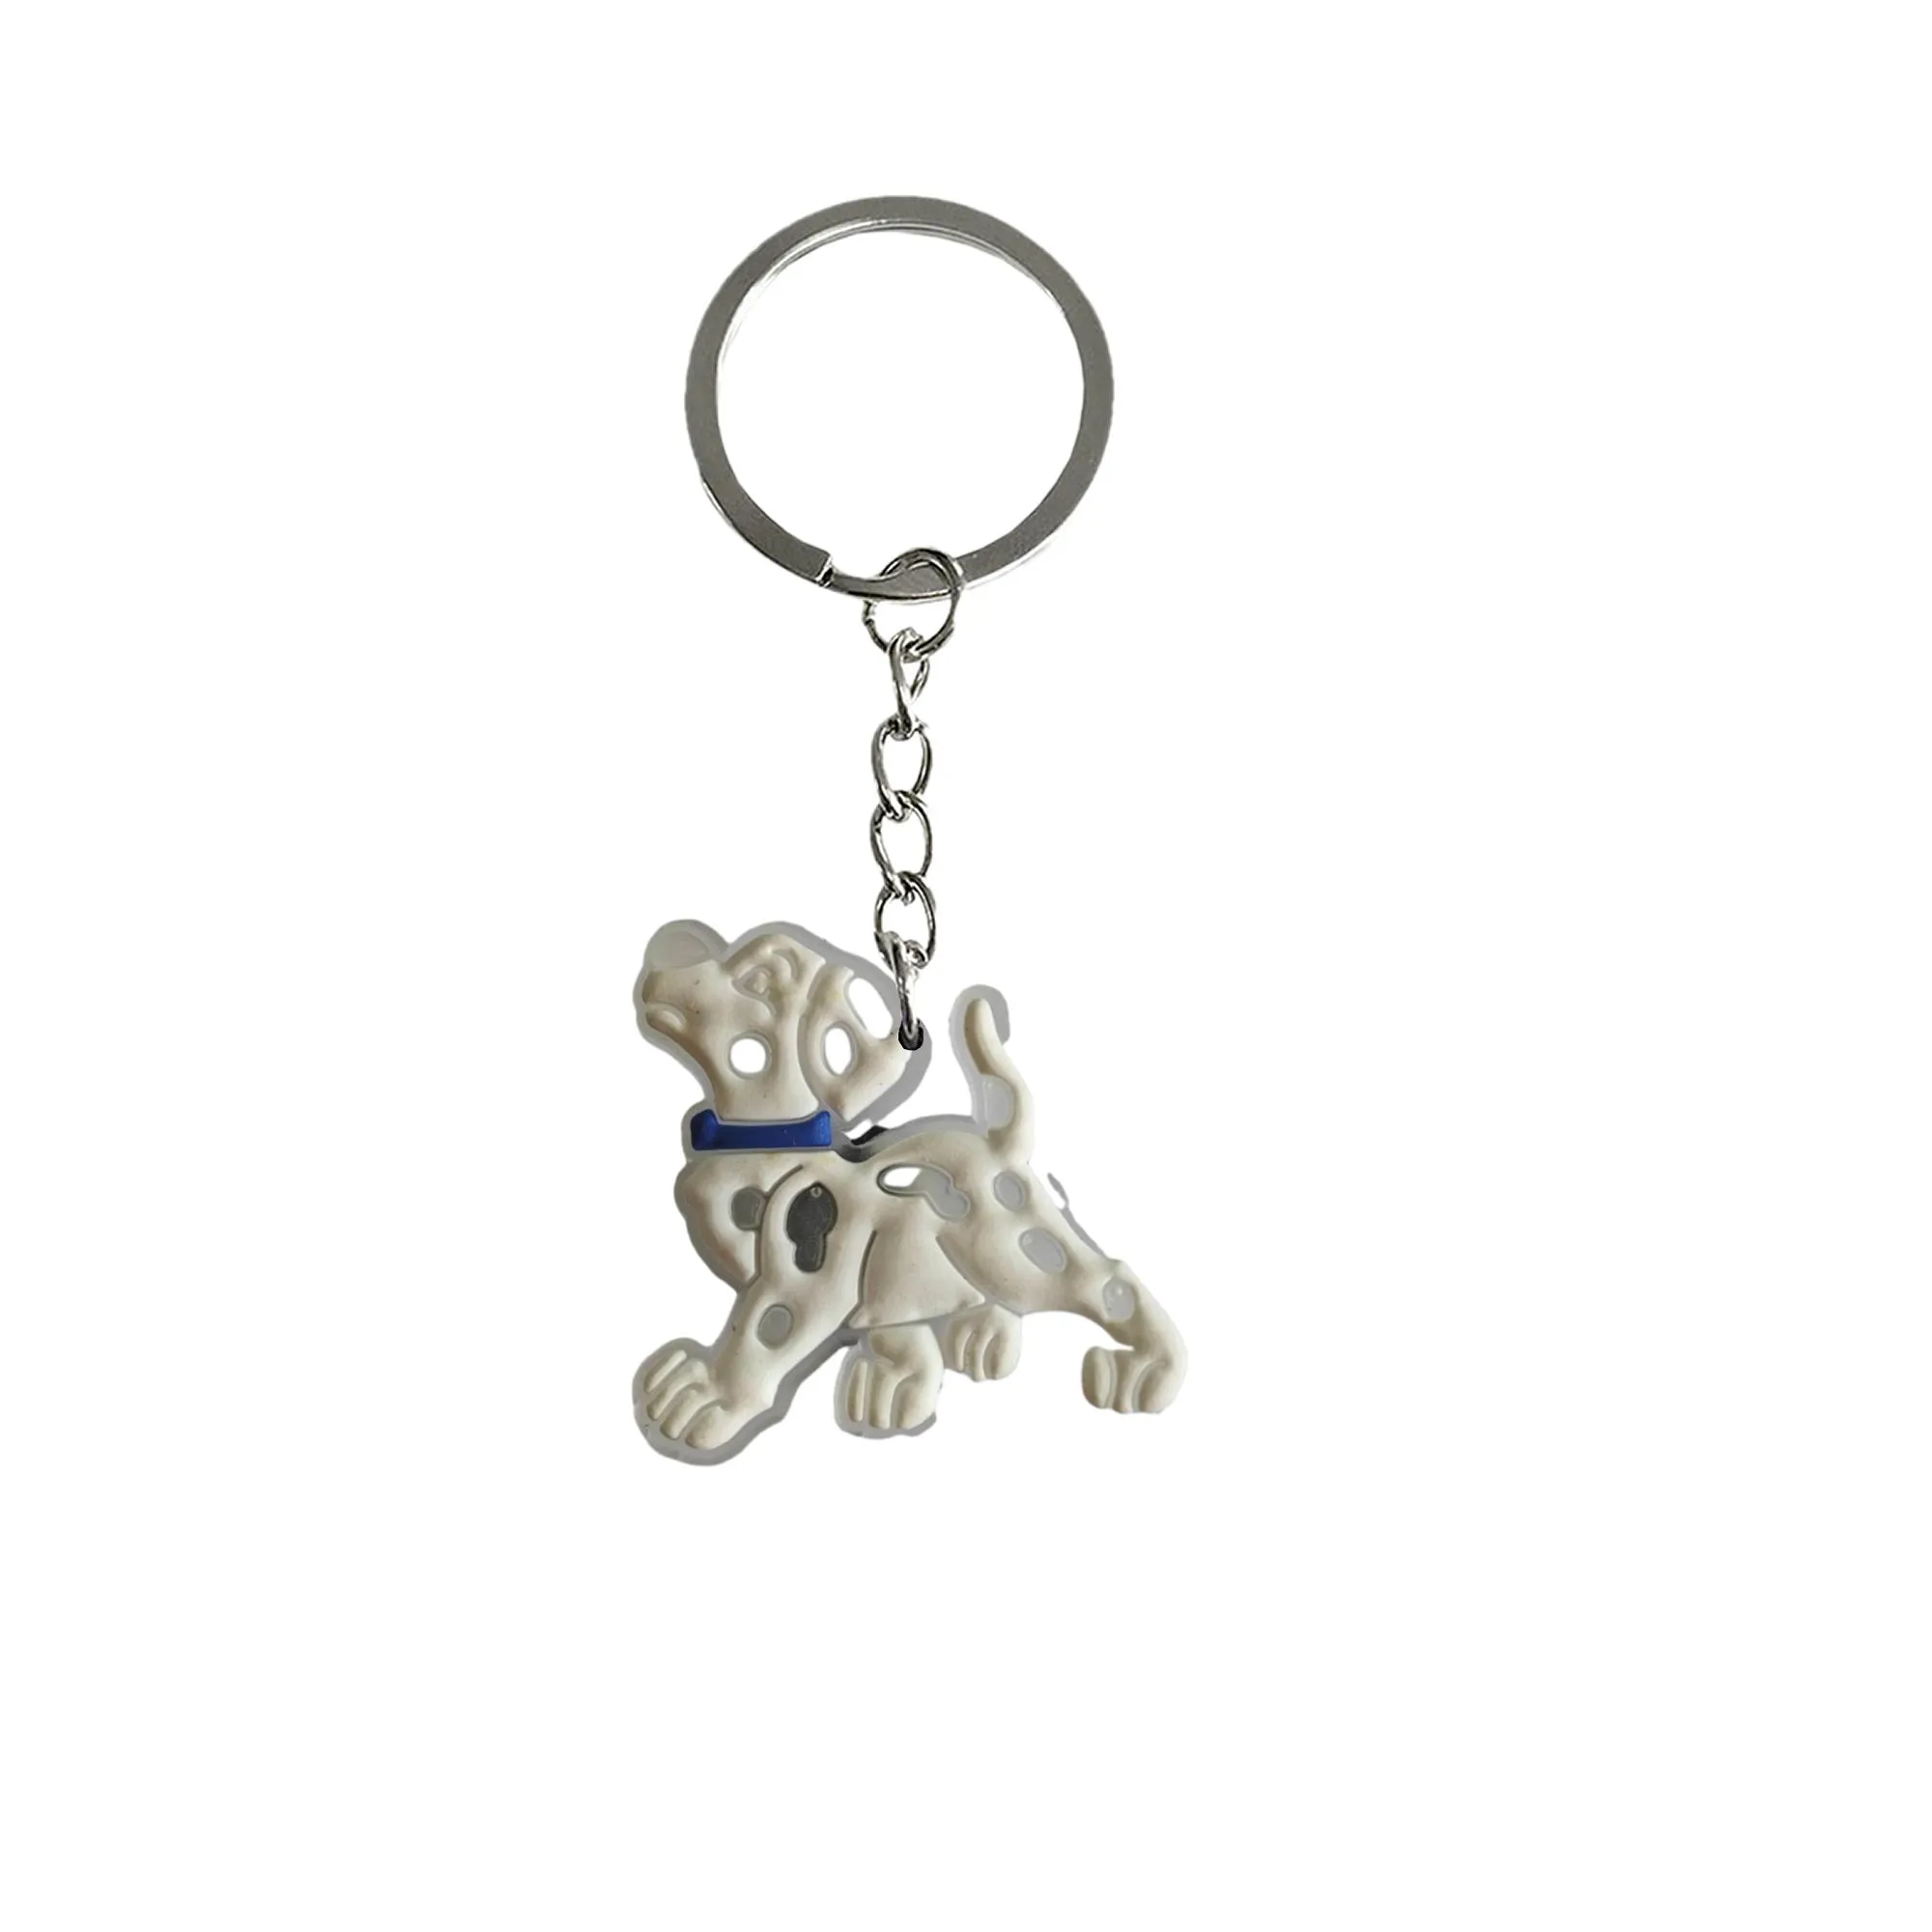 fluorescent dog 3 keychain key chain for girls mini cute keyring classroom prizes keychains school day birthday party supplies gift suitable schoolbag anime cool backpacks pendants accessories kids favors boys